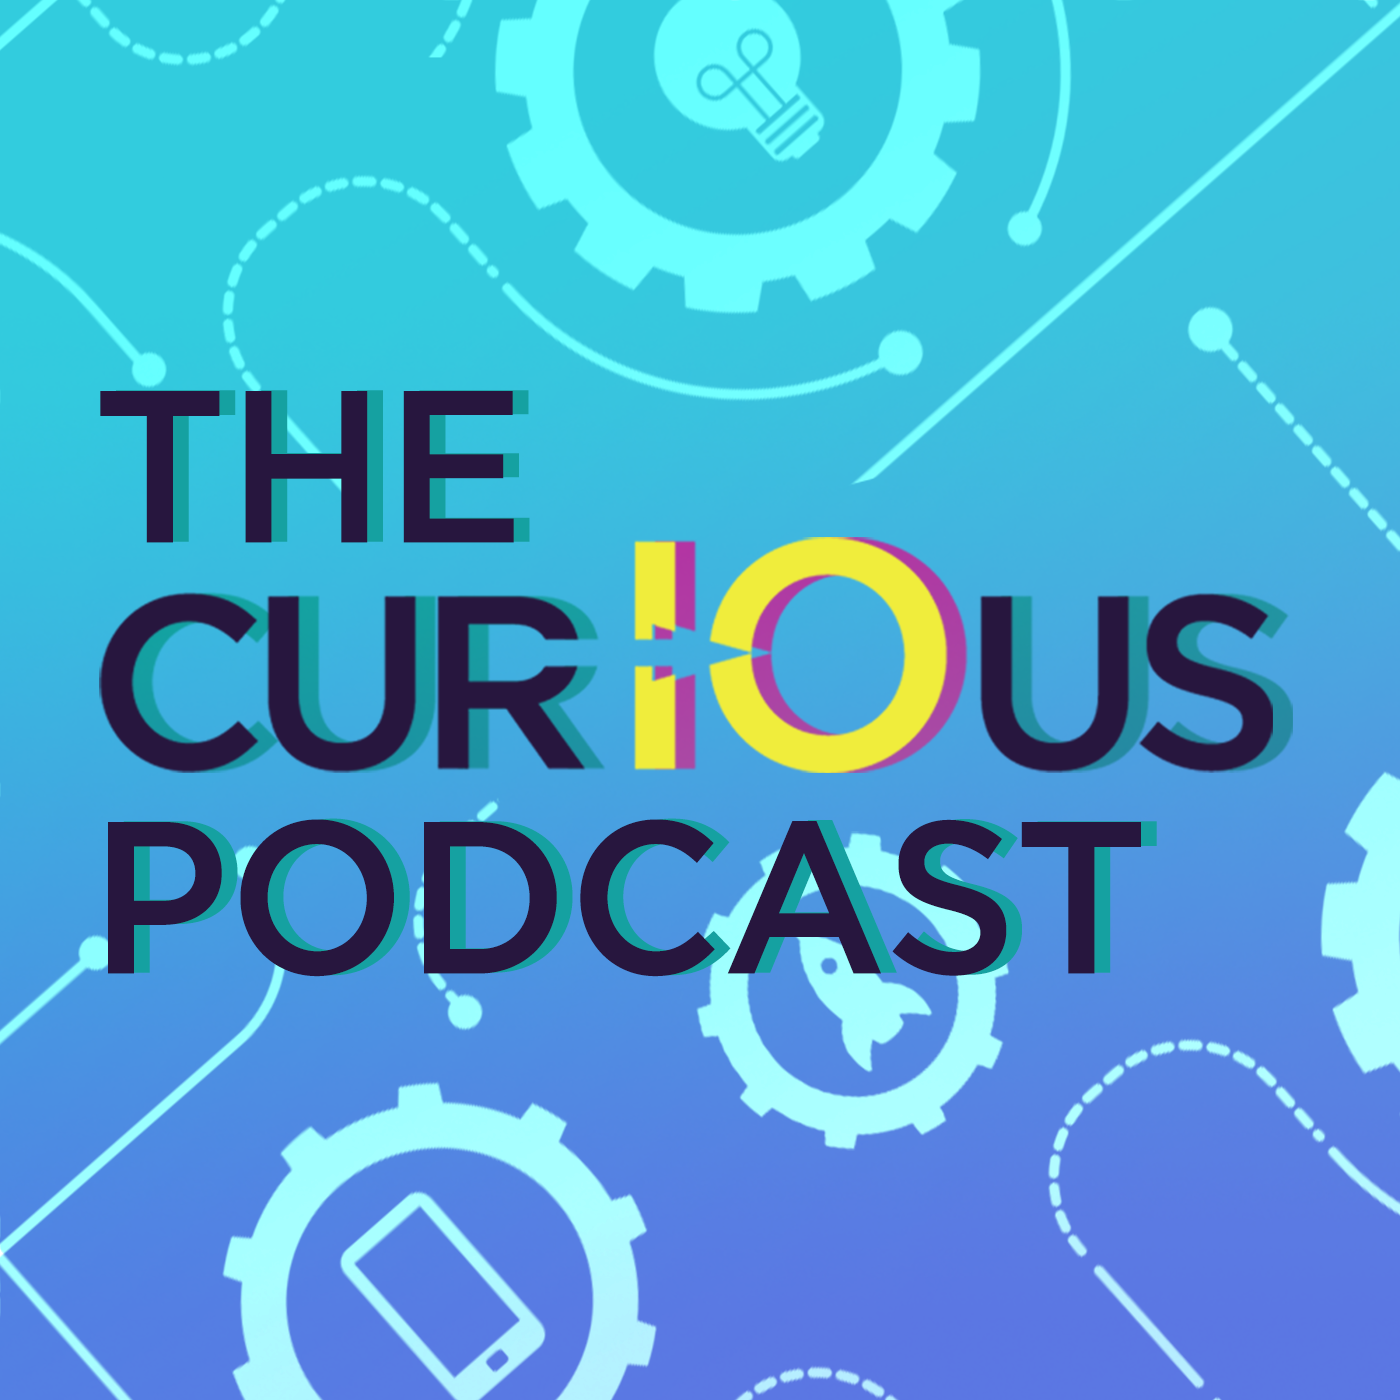 Digital for Life Fund Project: Design of The Curious Podcast, celebrating Women in Tech and Science